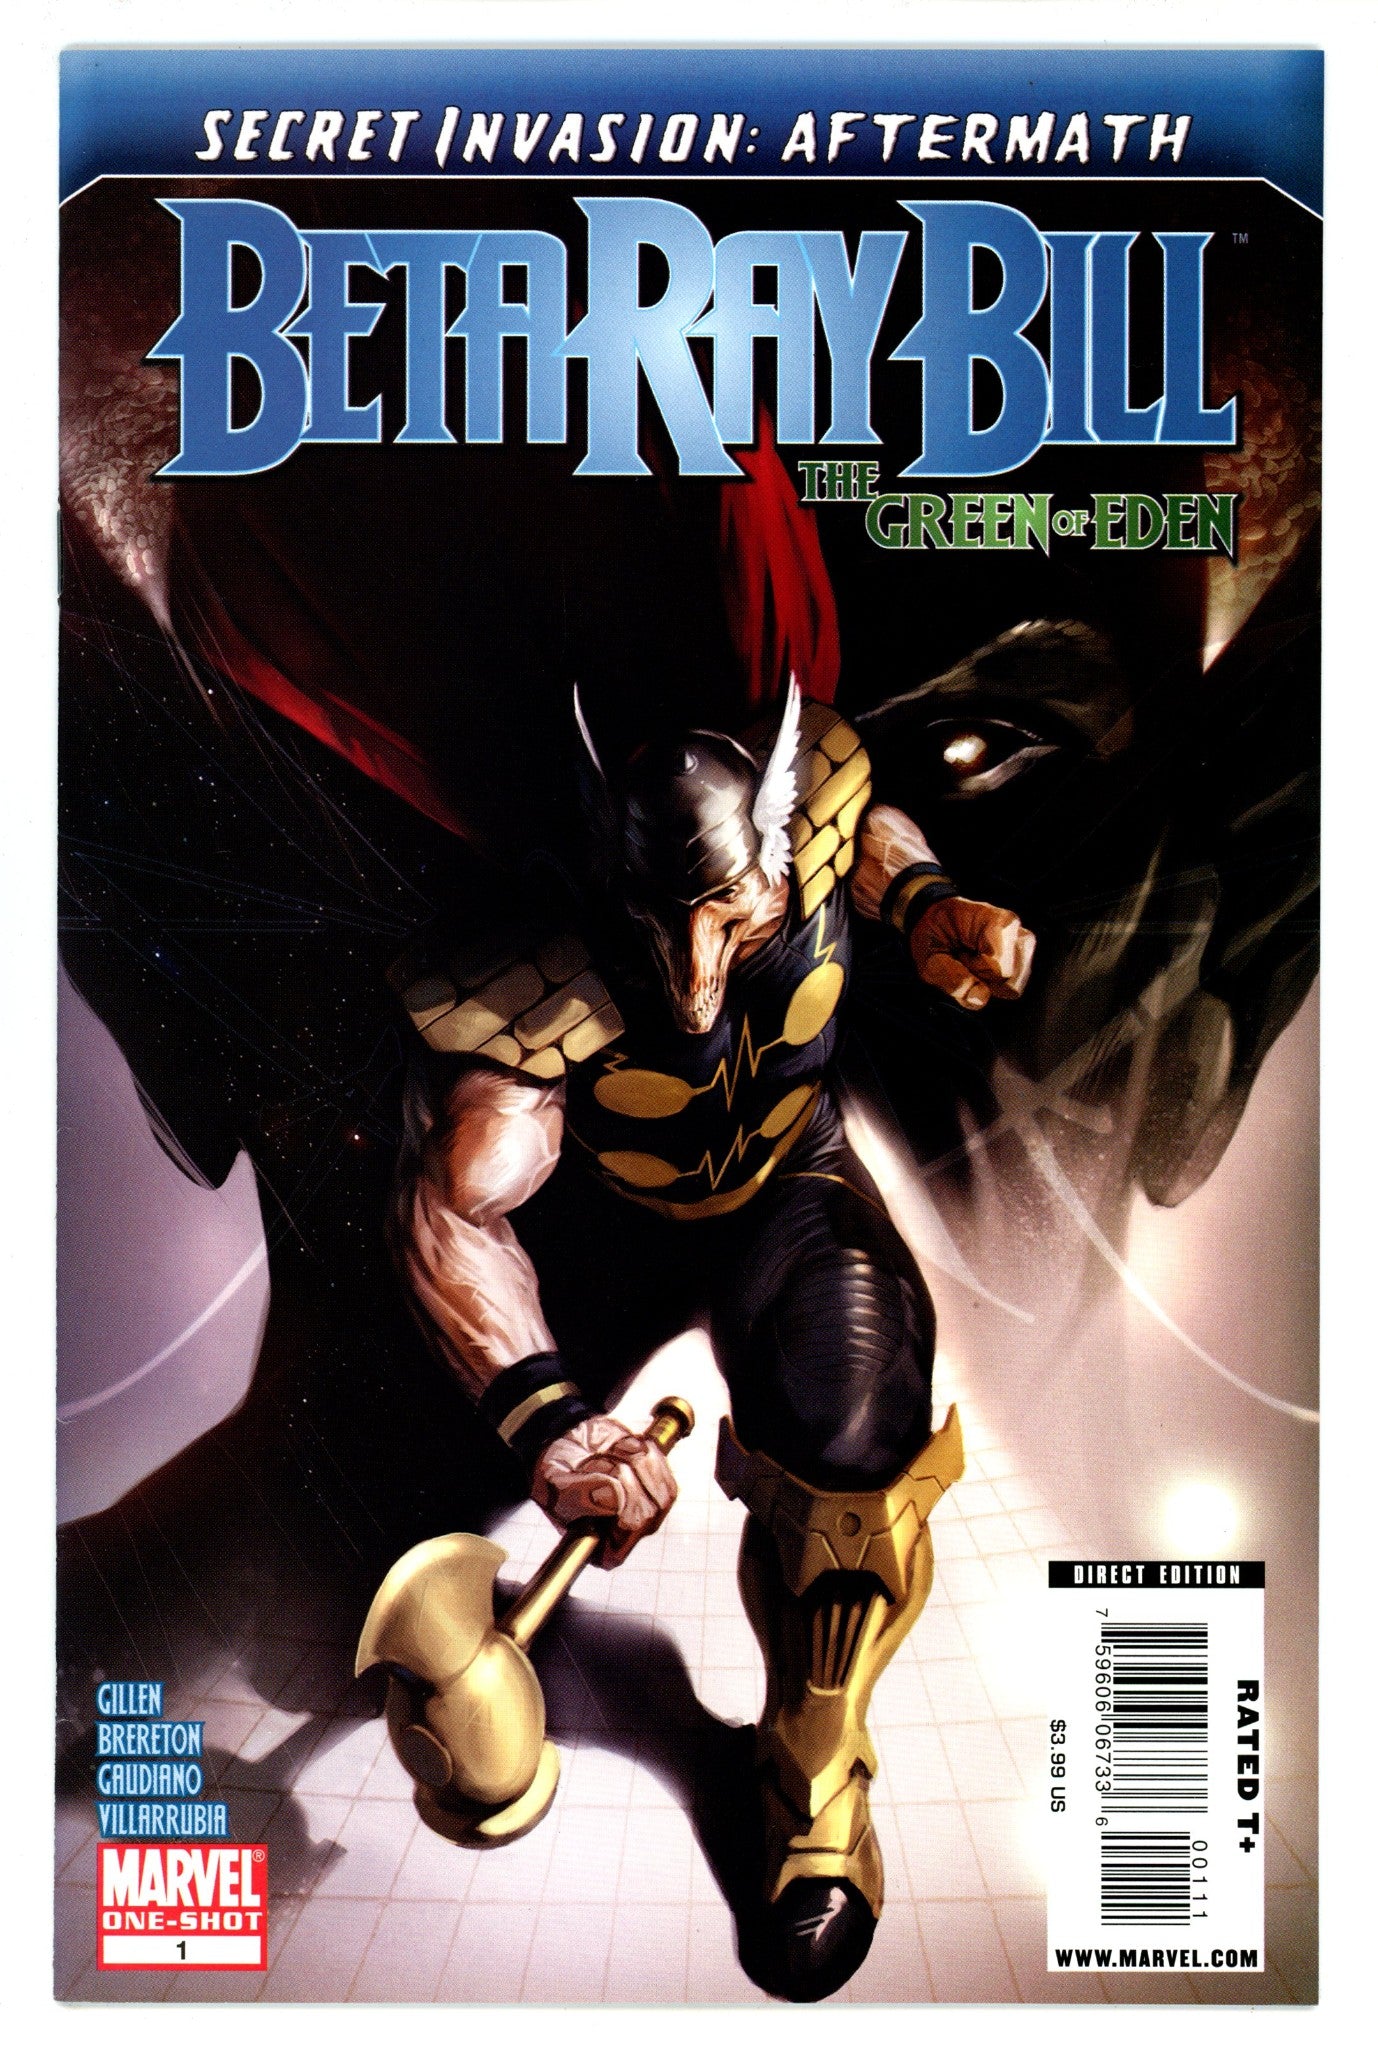 Secret Invasion Aftermath: Beta Ray Bill - The Green of Eden 1 VF/NM (9.0) (2009) 